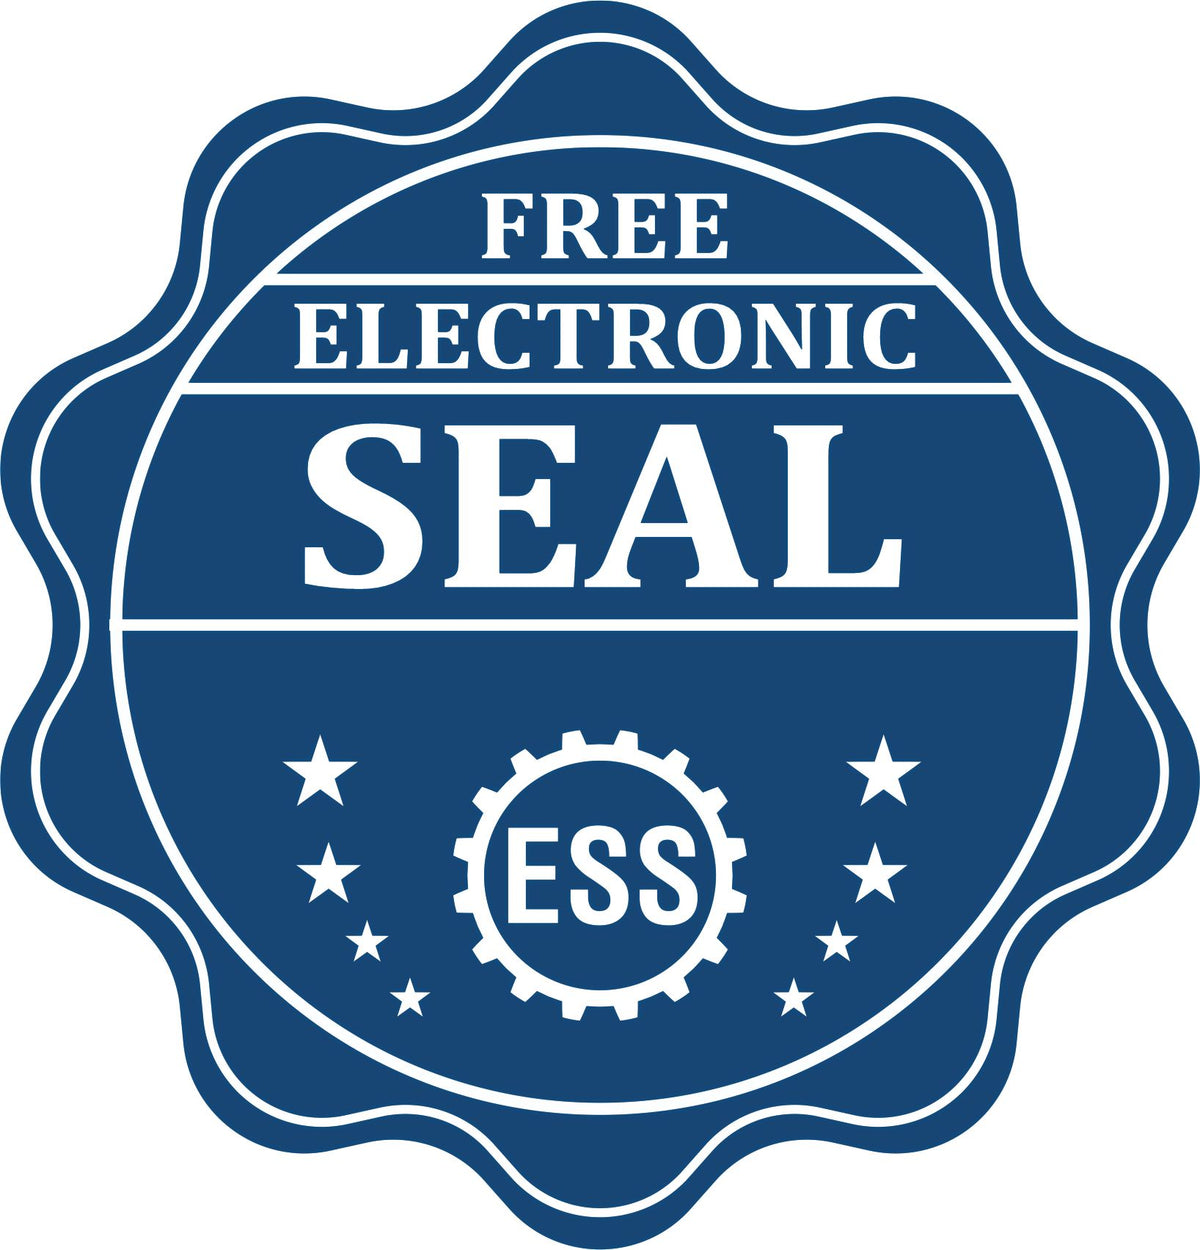 A badge showing a free electronic seal for the Hybrid Vermont Land Surveyor Seal with stars and the ESS gear on the emblem.